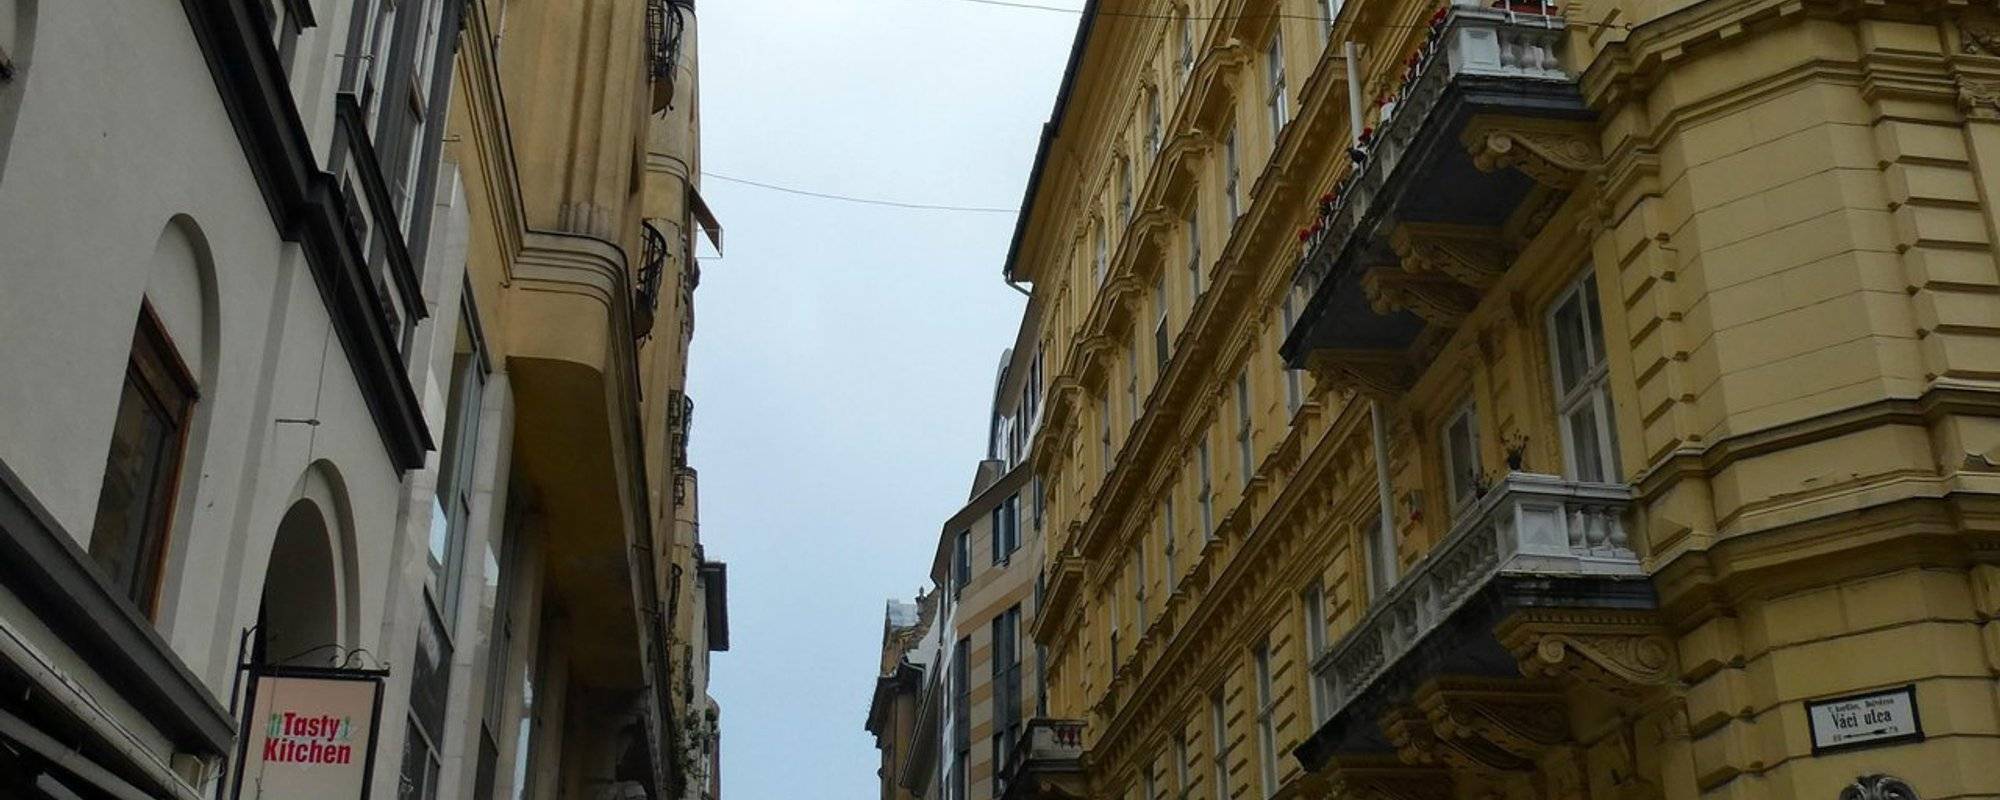 The Vaci Street, in Budapest, is a Great Neighbourhood to Stay In